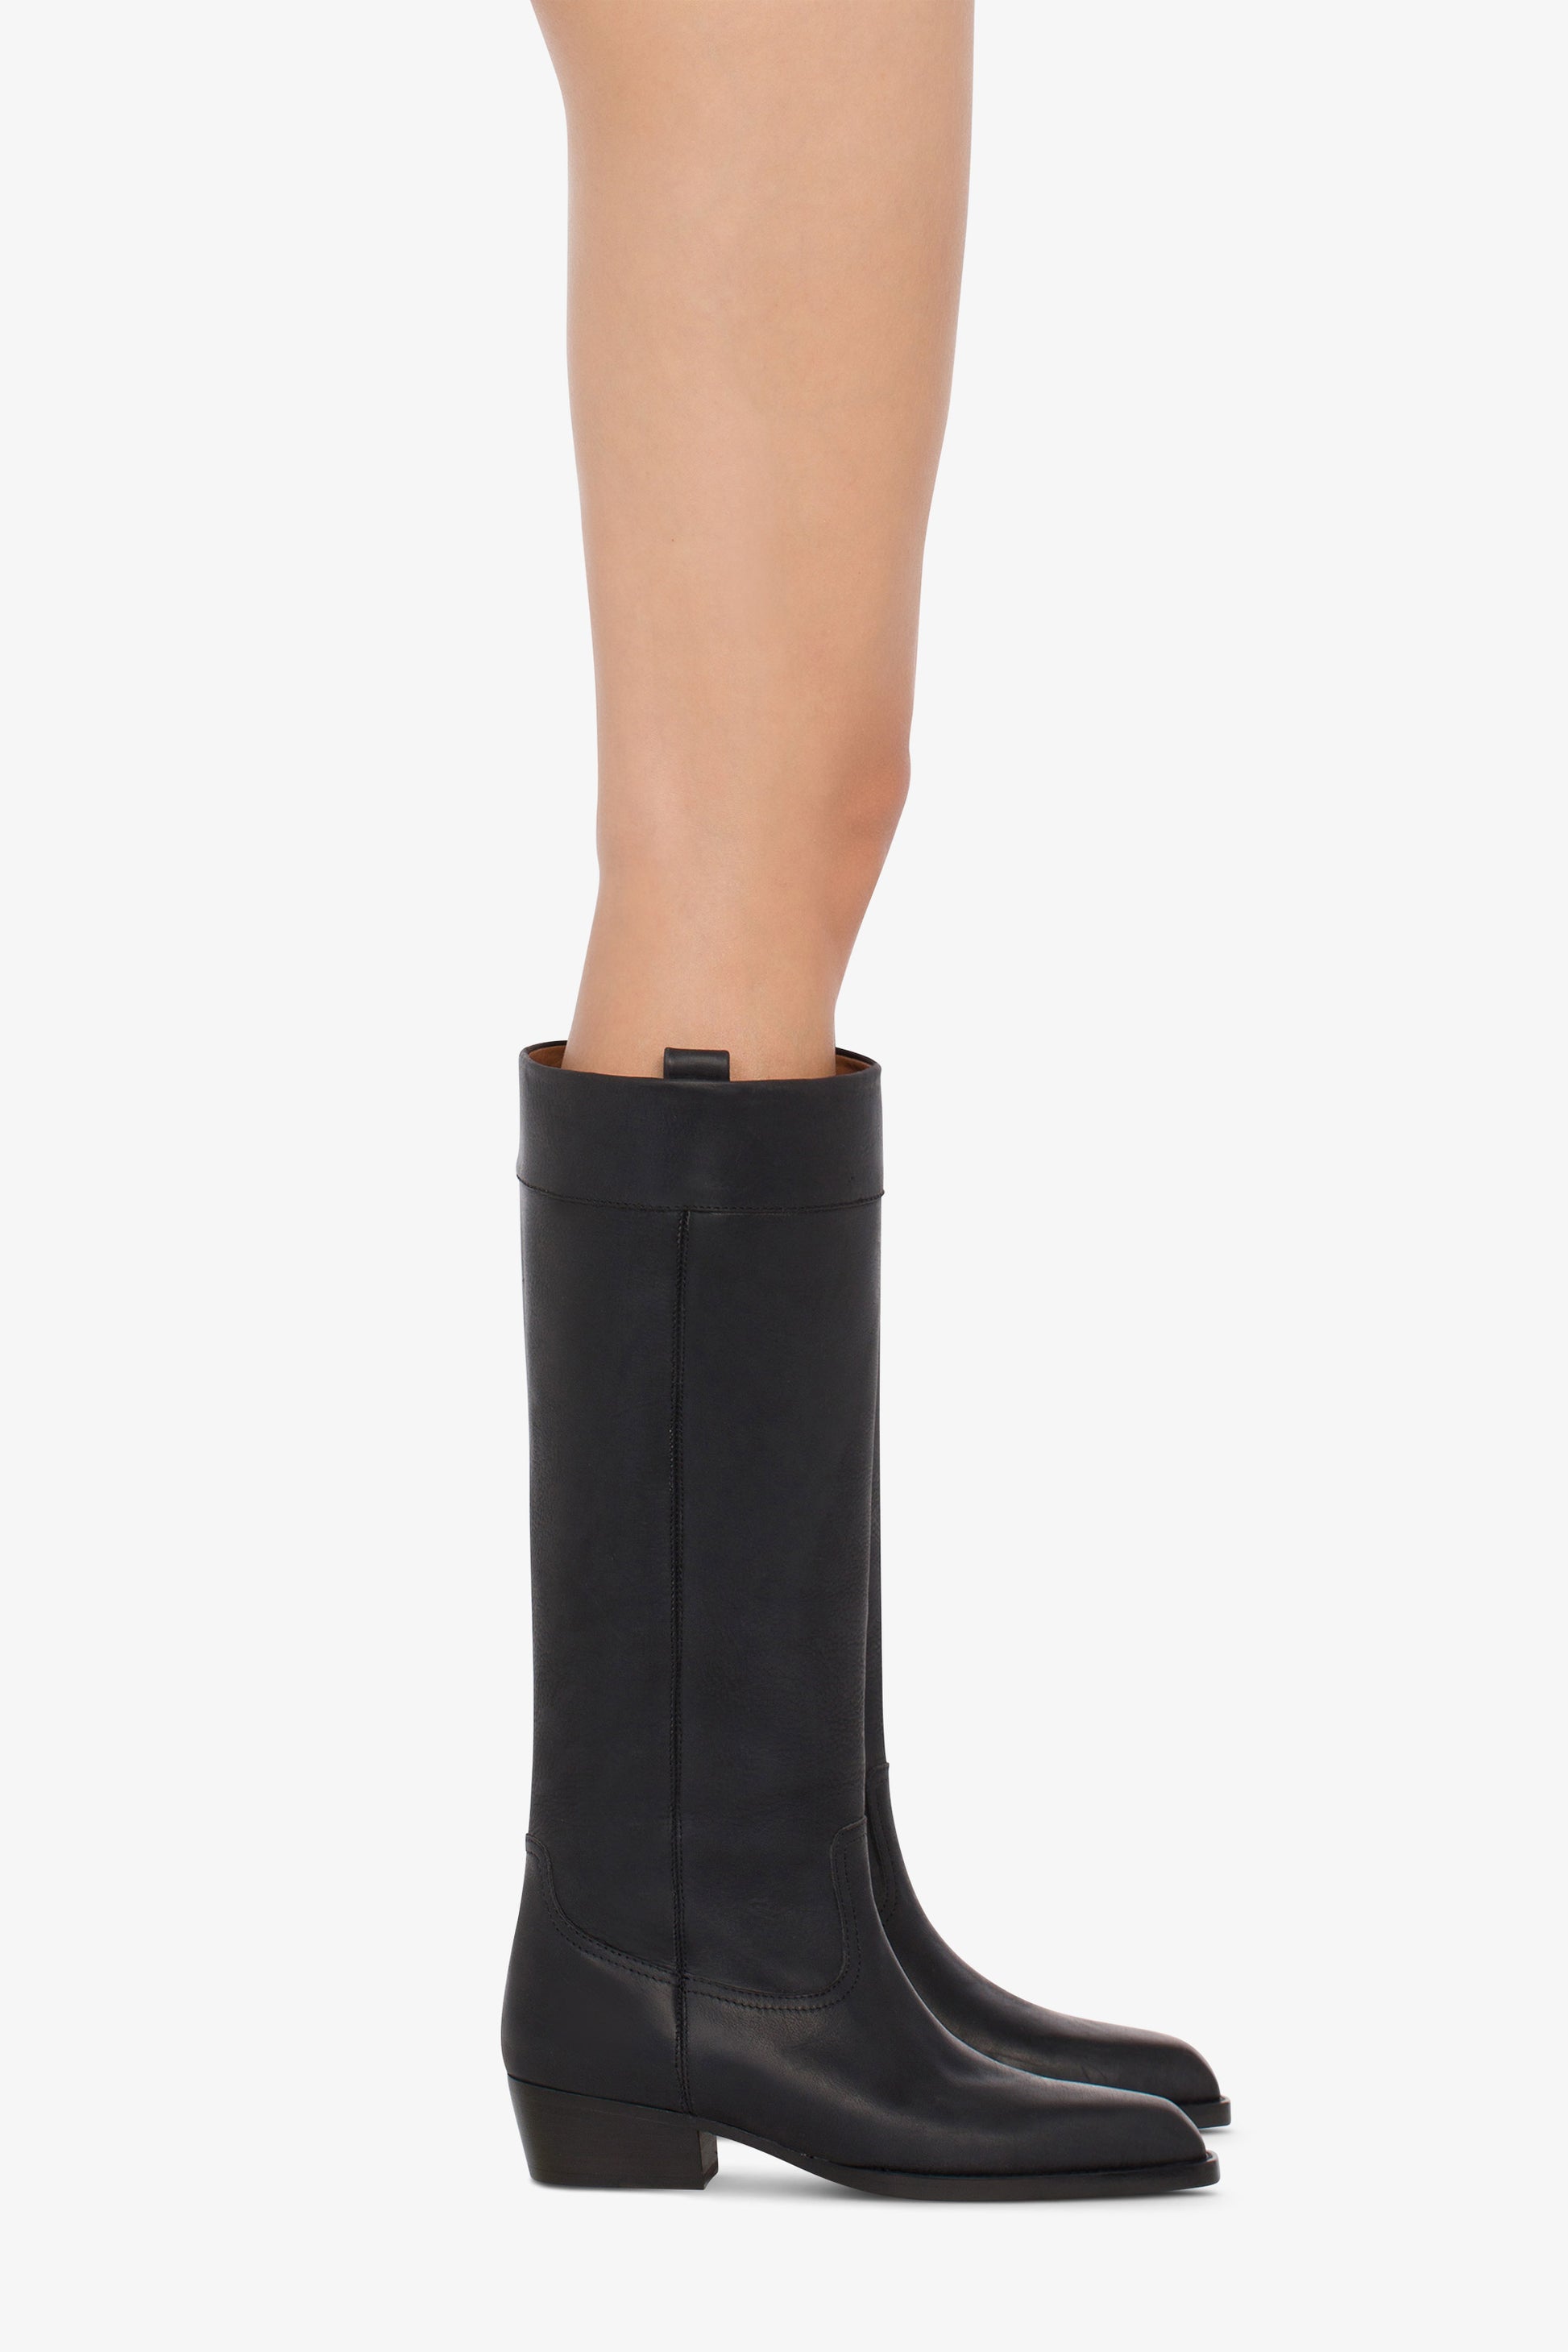 Calf-length boots in soft black pebble leather - Producto usado